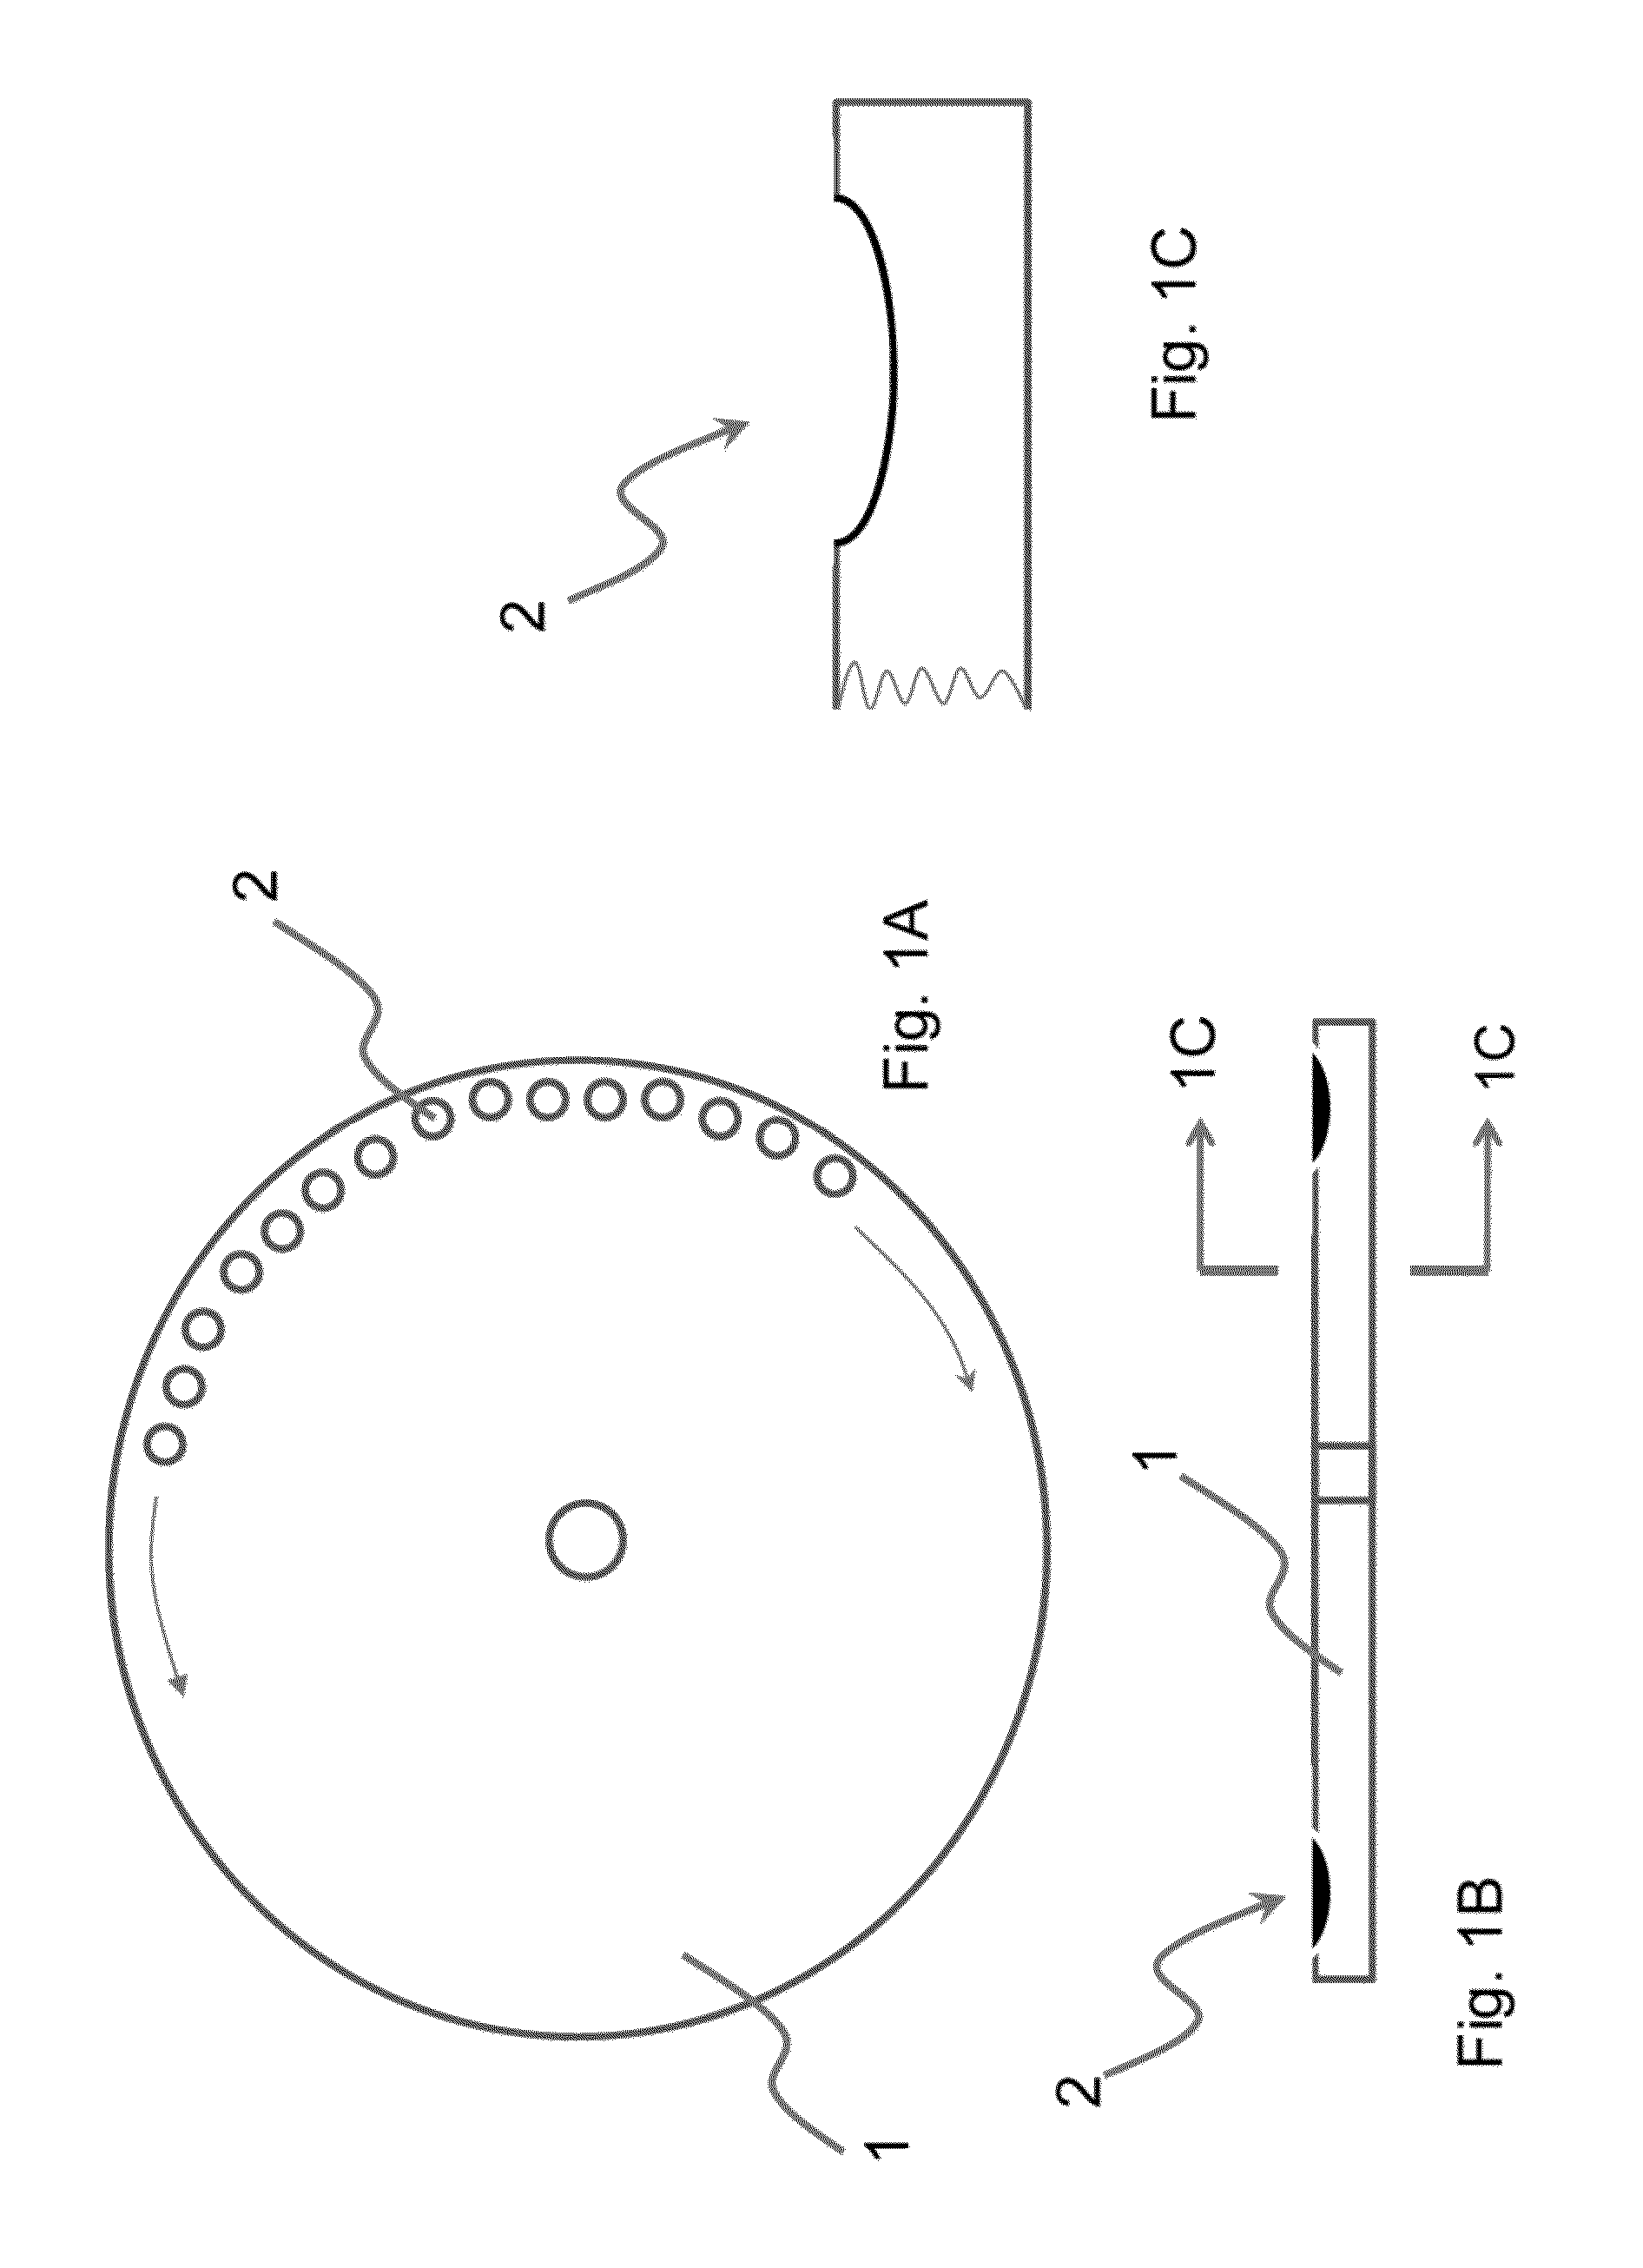 Method and apparatus for conducting an assay